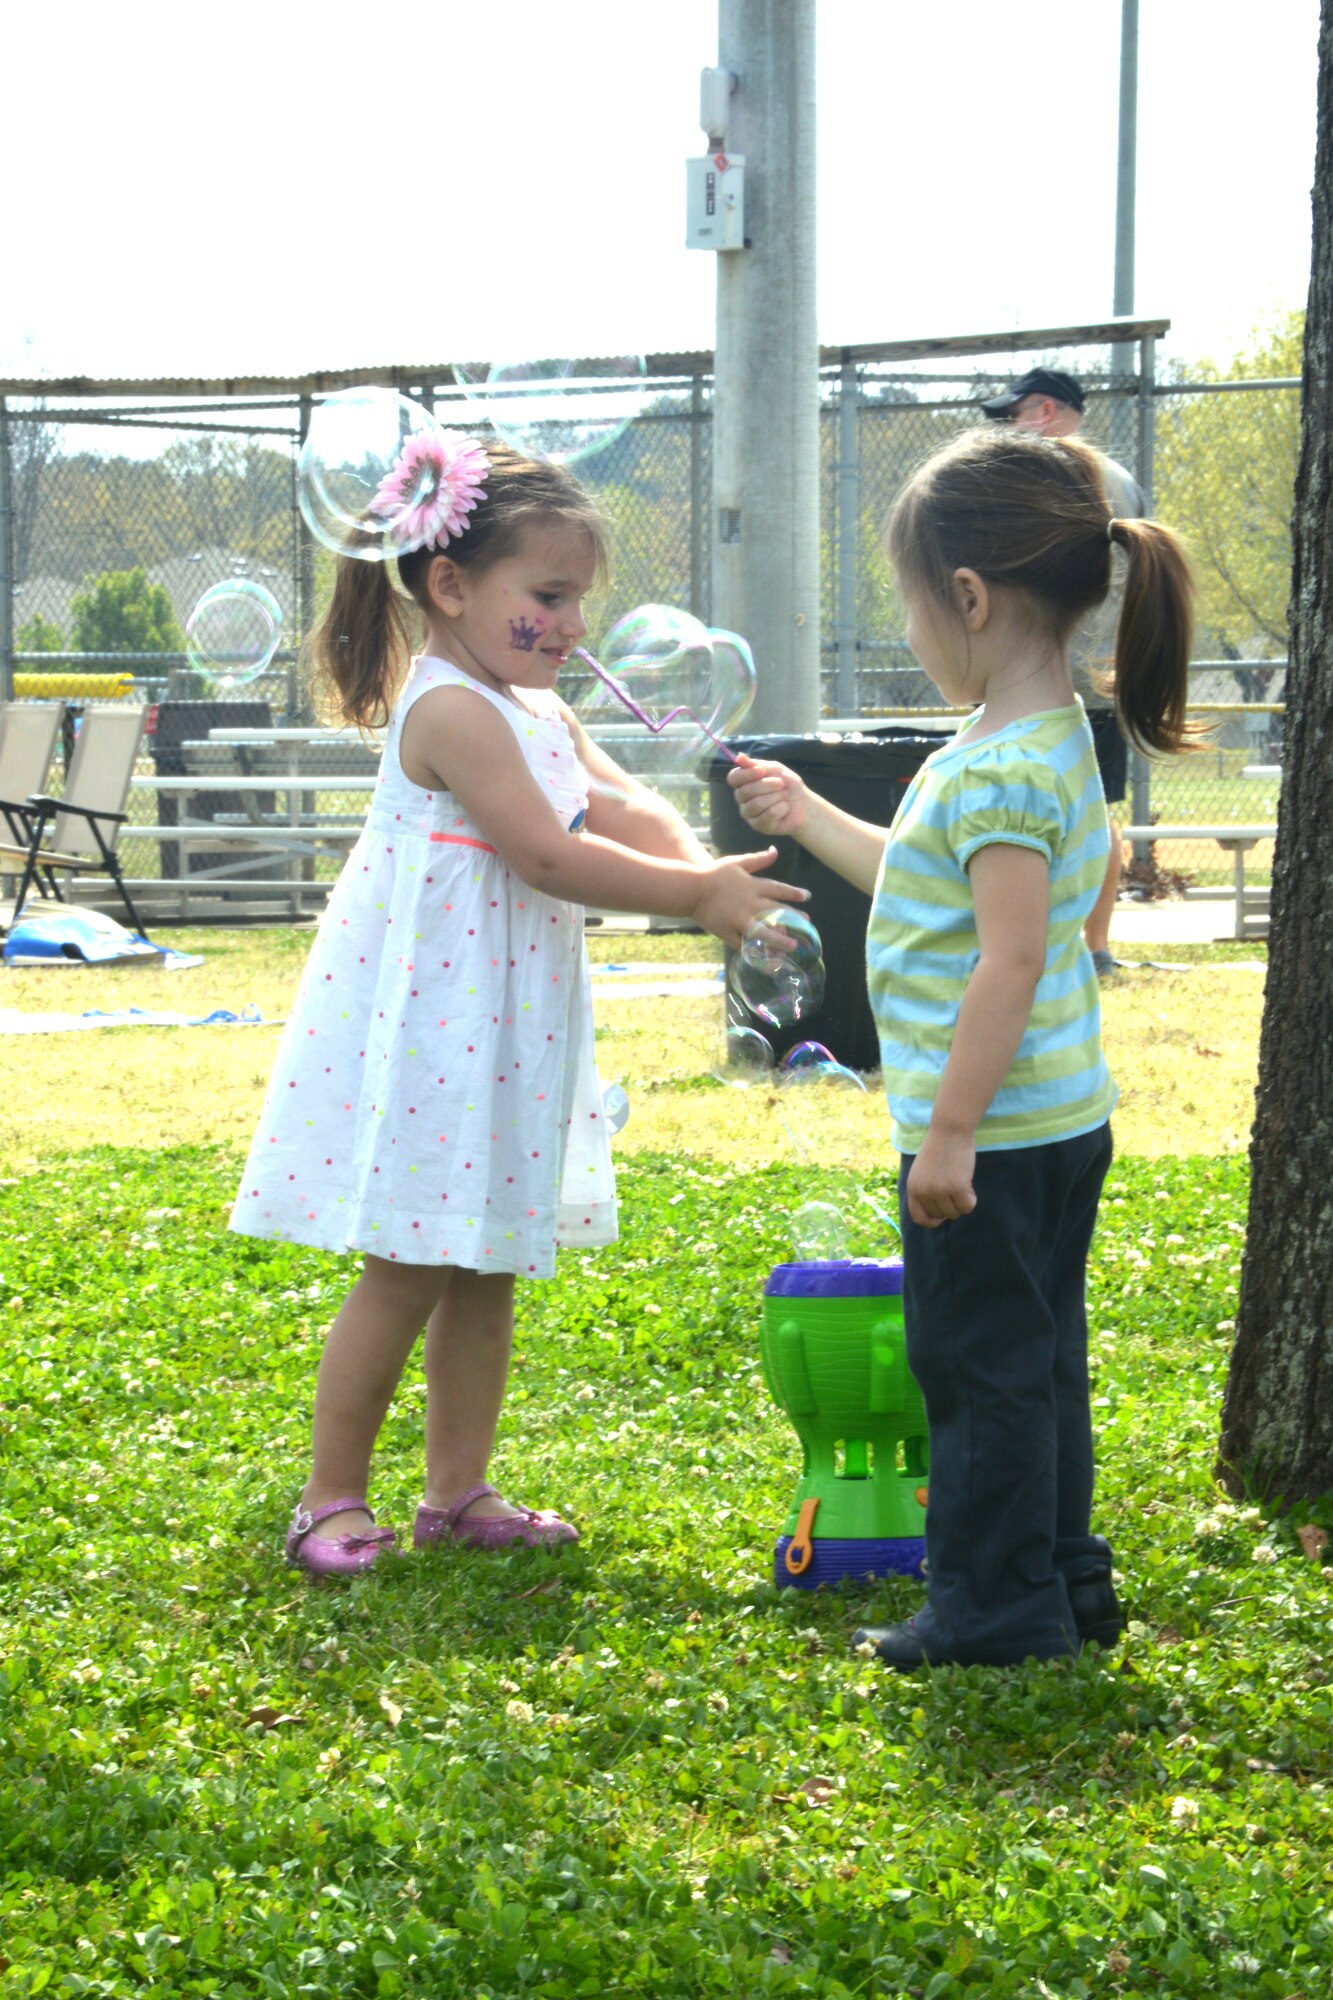 Kayden Maxey (left) and Kaylee Dalman have fun with bubbles. Attendees were also treated to a health and wellness education fair, zumba and face painting. (U.S. Air Force photo by Ed Aspera/Released)